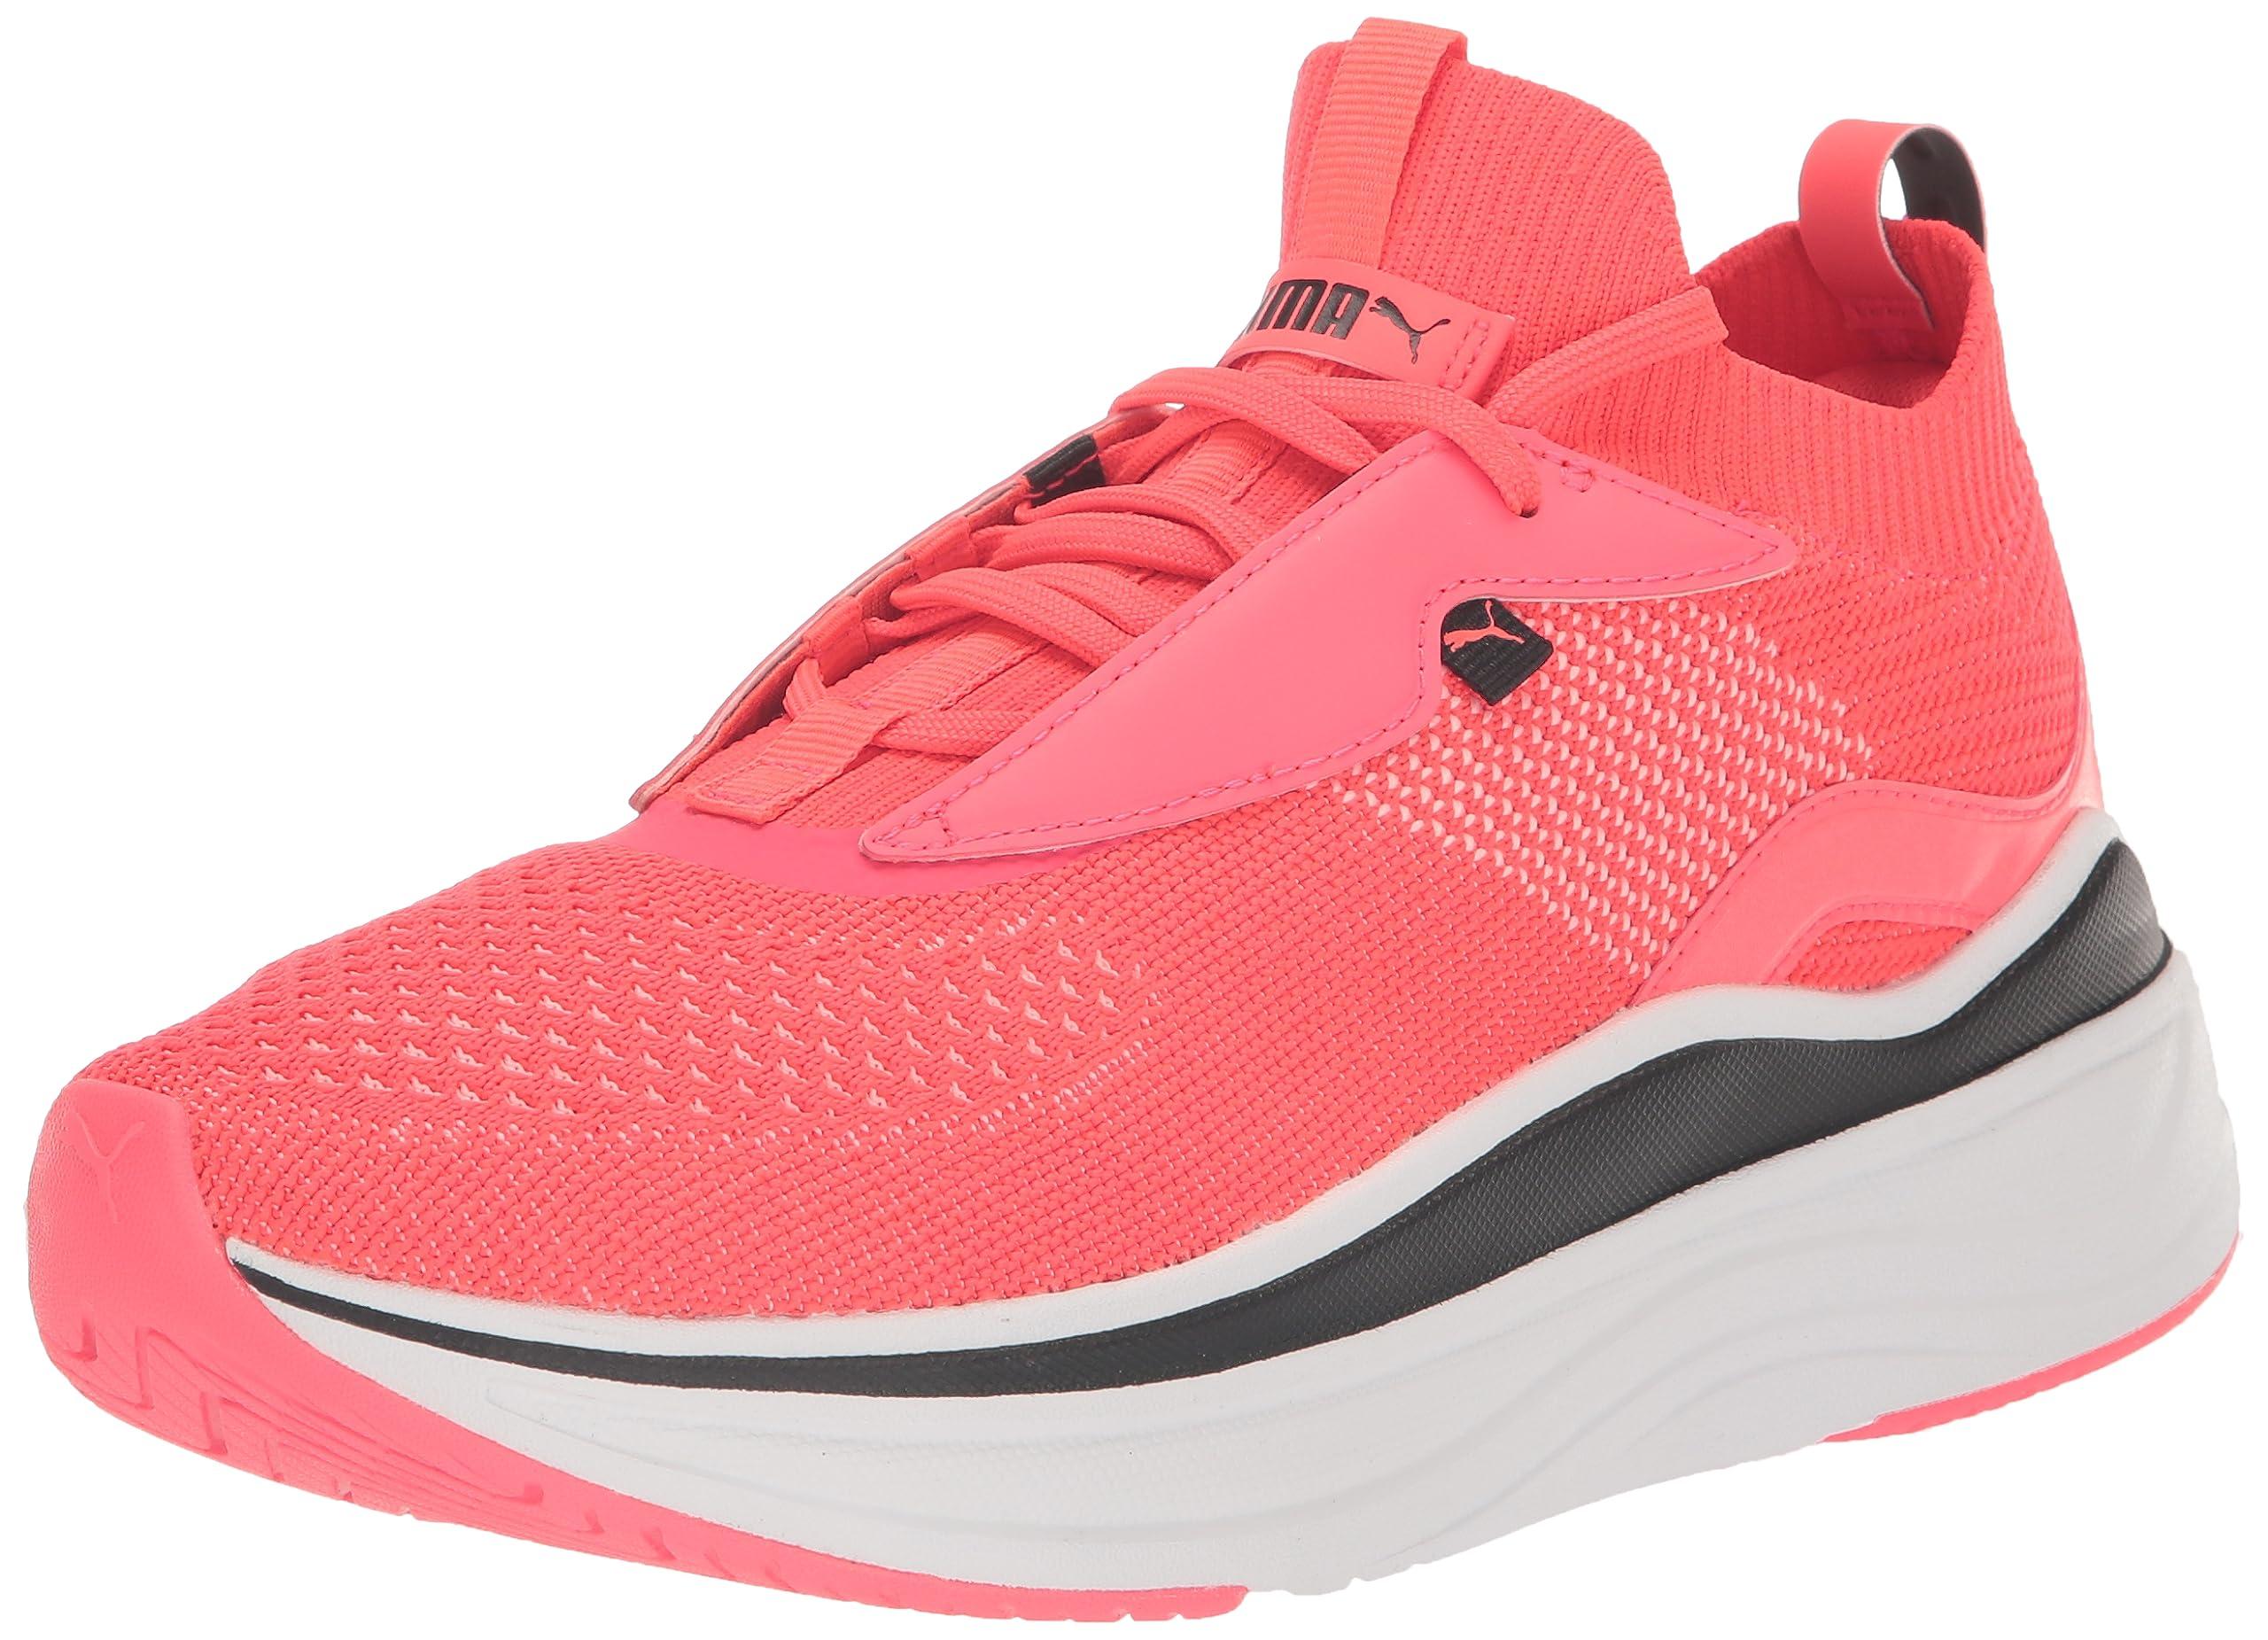 PUMA Softride Stakd Wns Sneaker in Red | Lyst